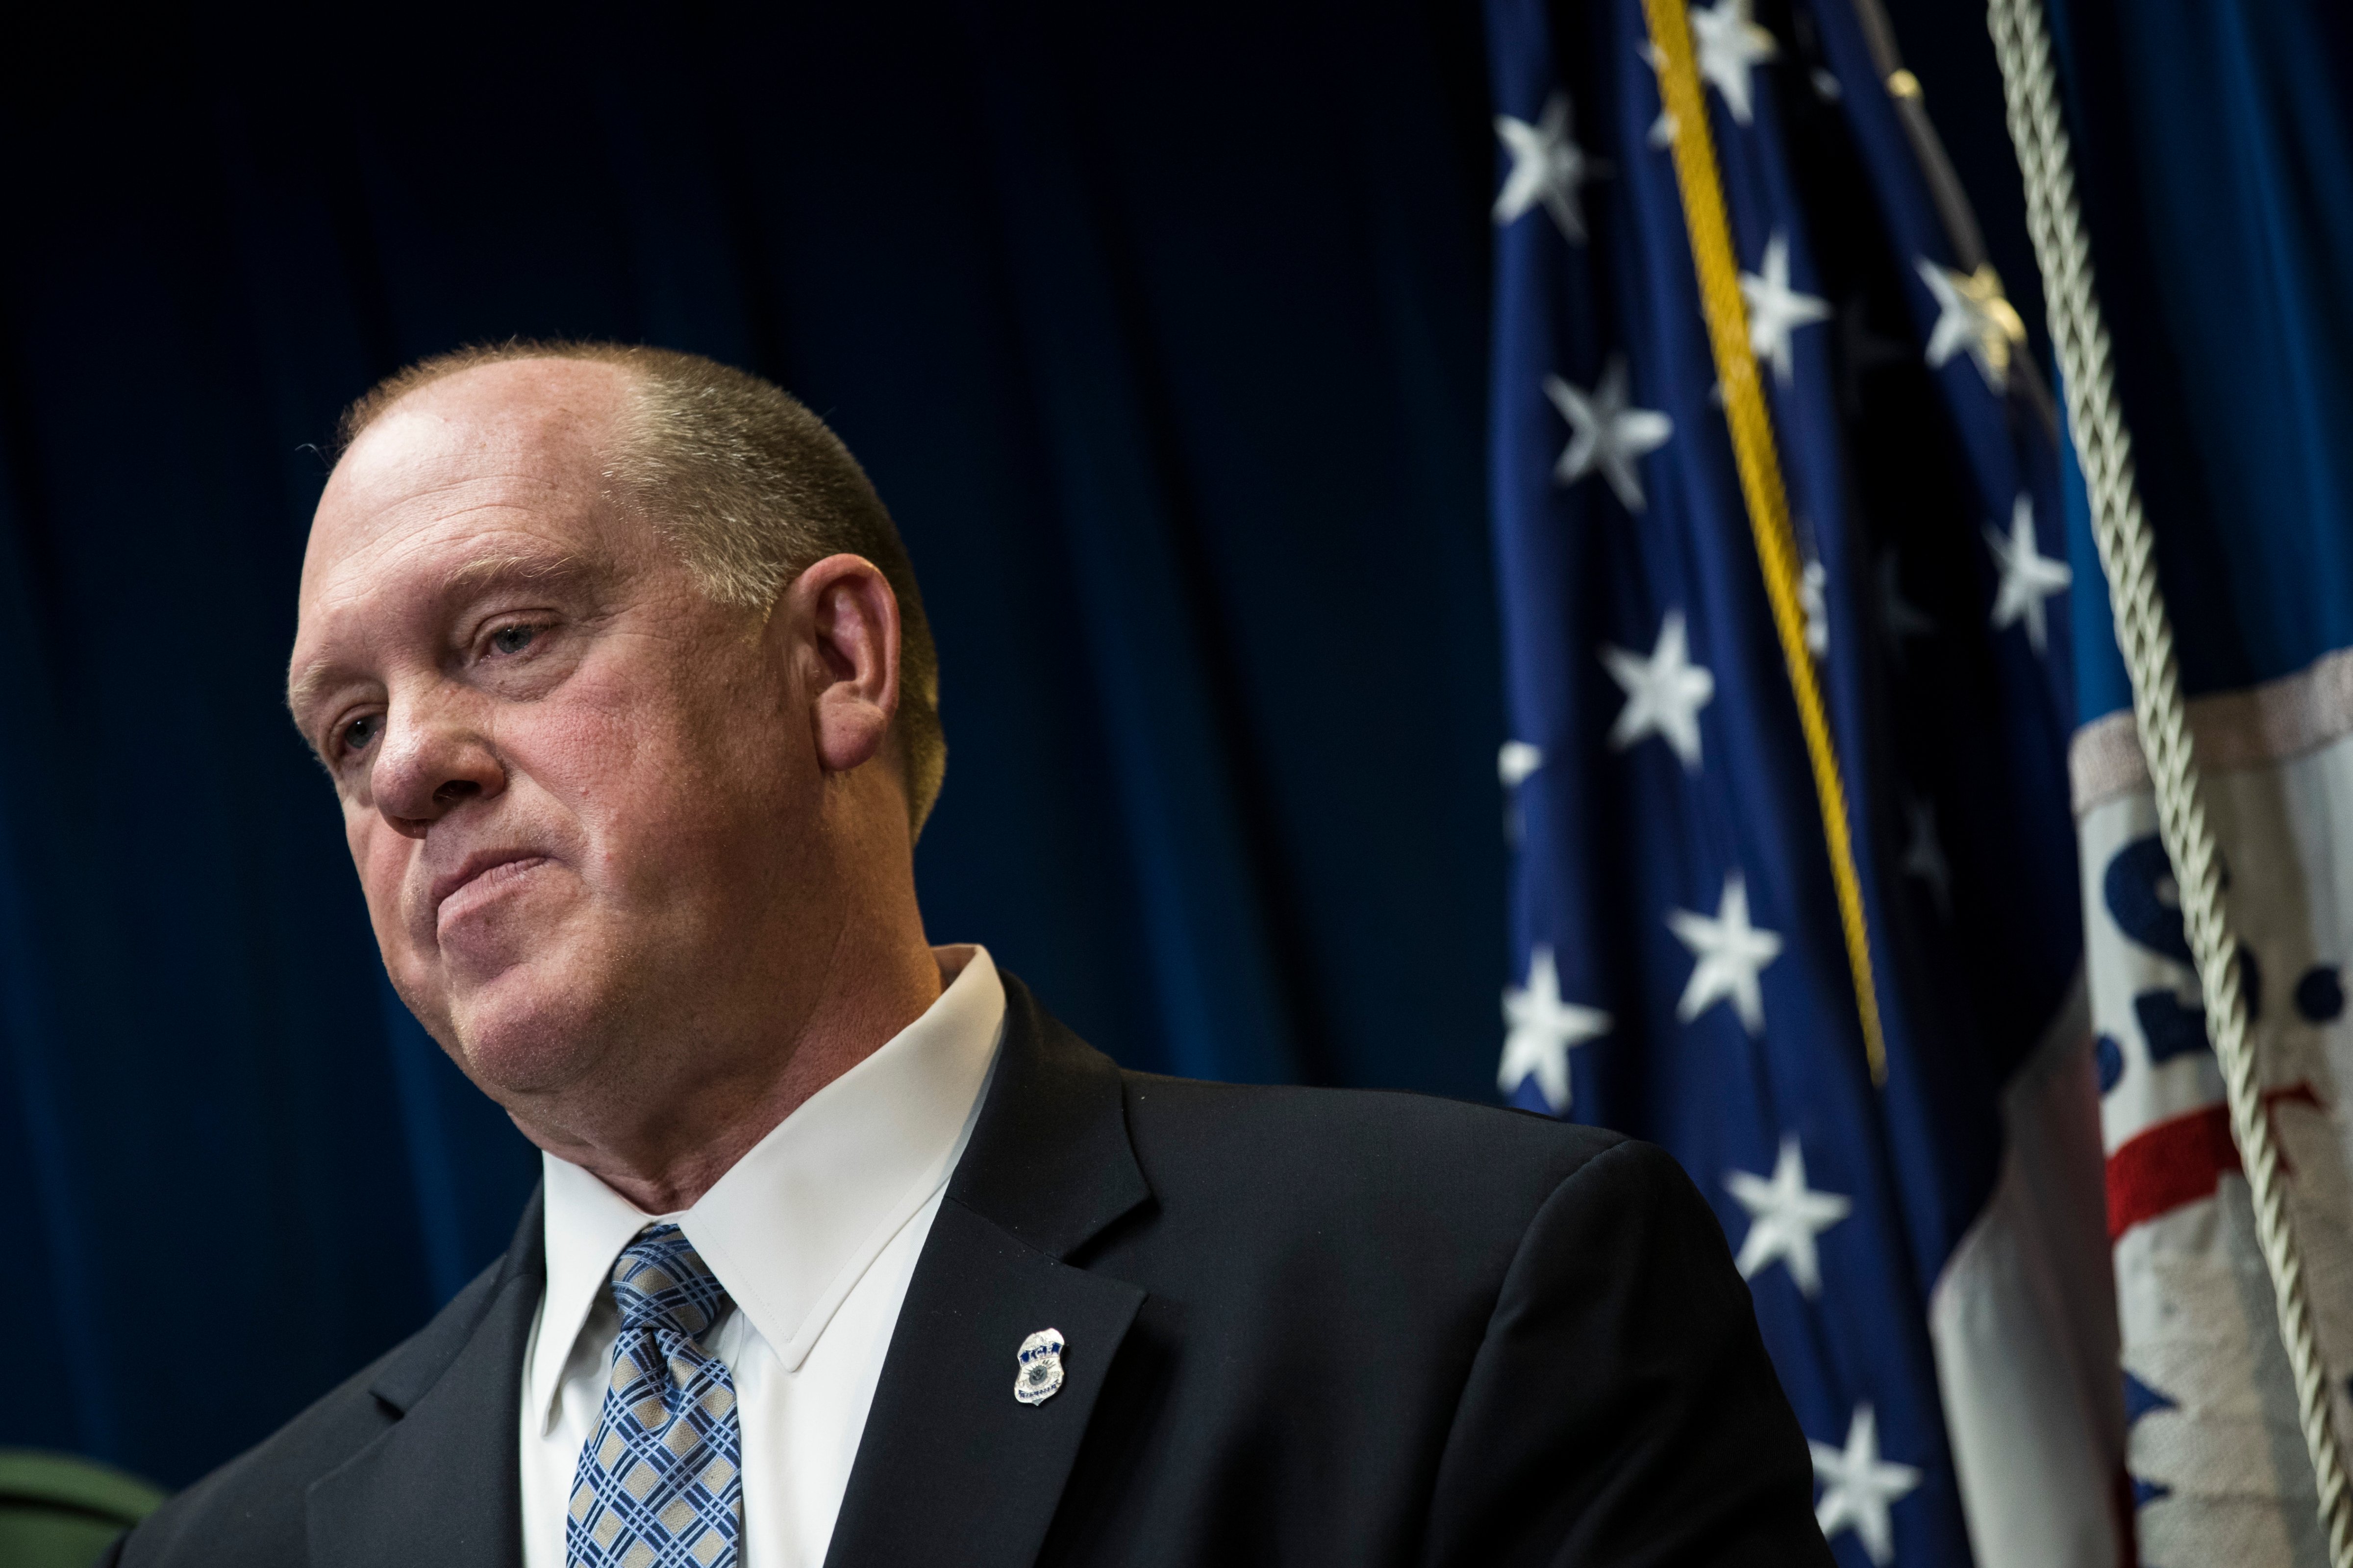 Thomas Homan, acting director of Immigration and Customs Enforcement (ICE), speaks during a Department of Homeland Security press conference in Washington, D.C. on Dec. 5, 2017. (Drew Angerer—Getty Images)